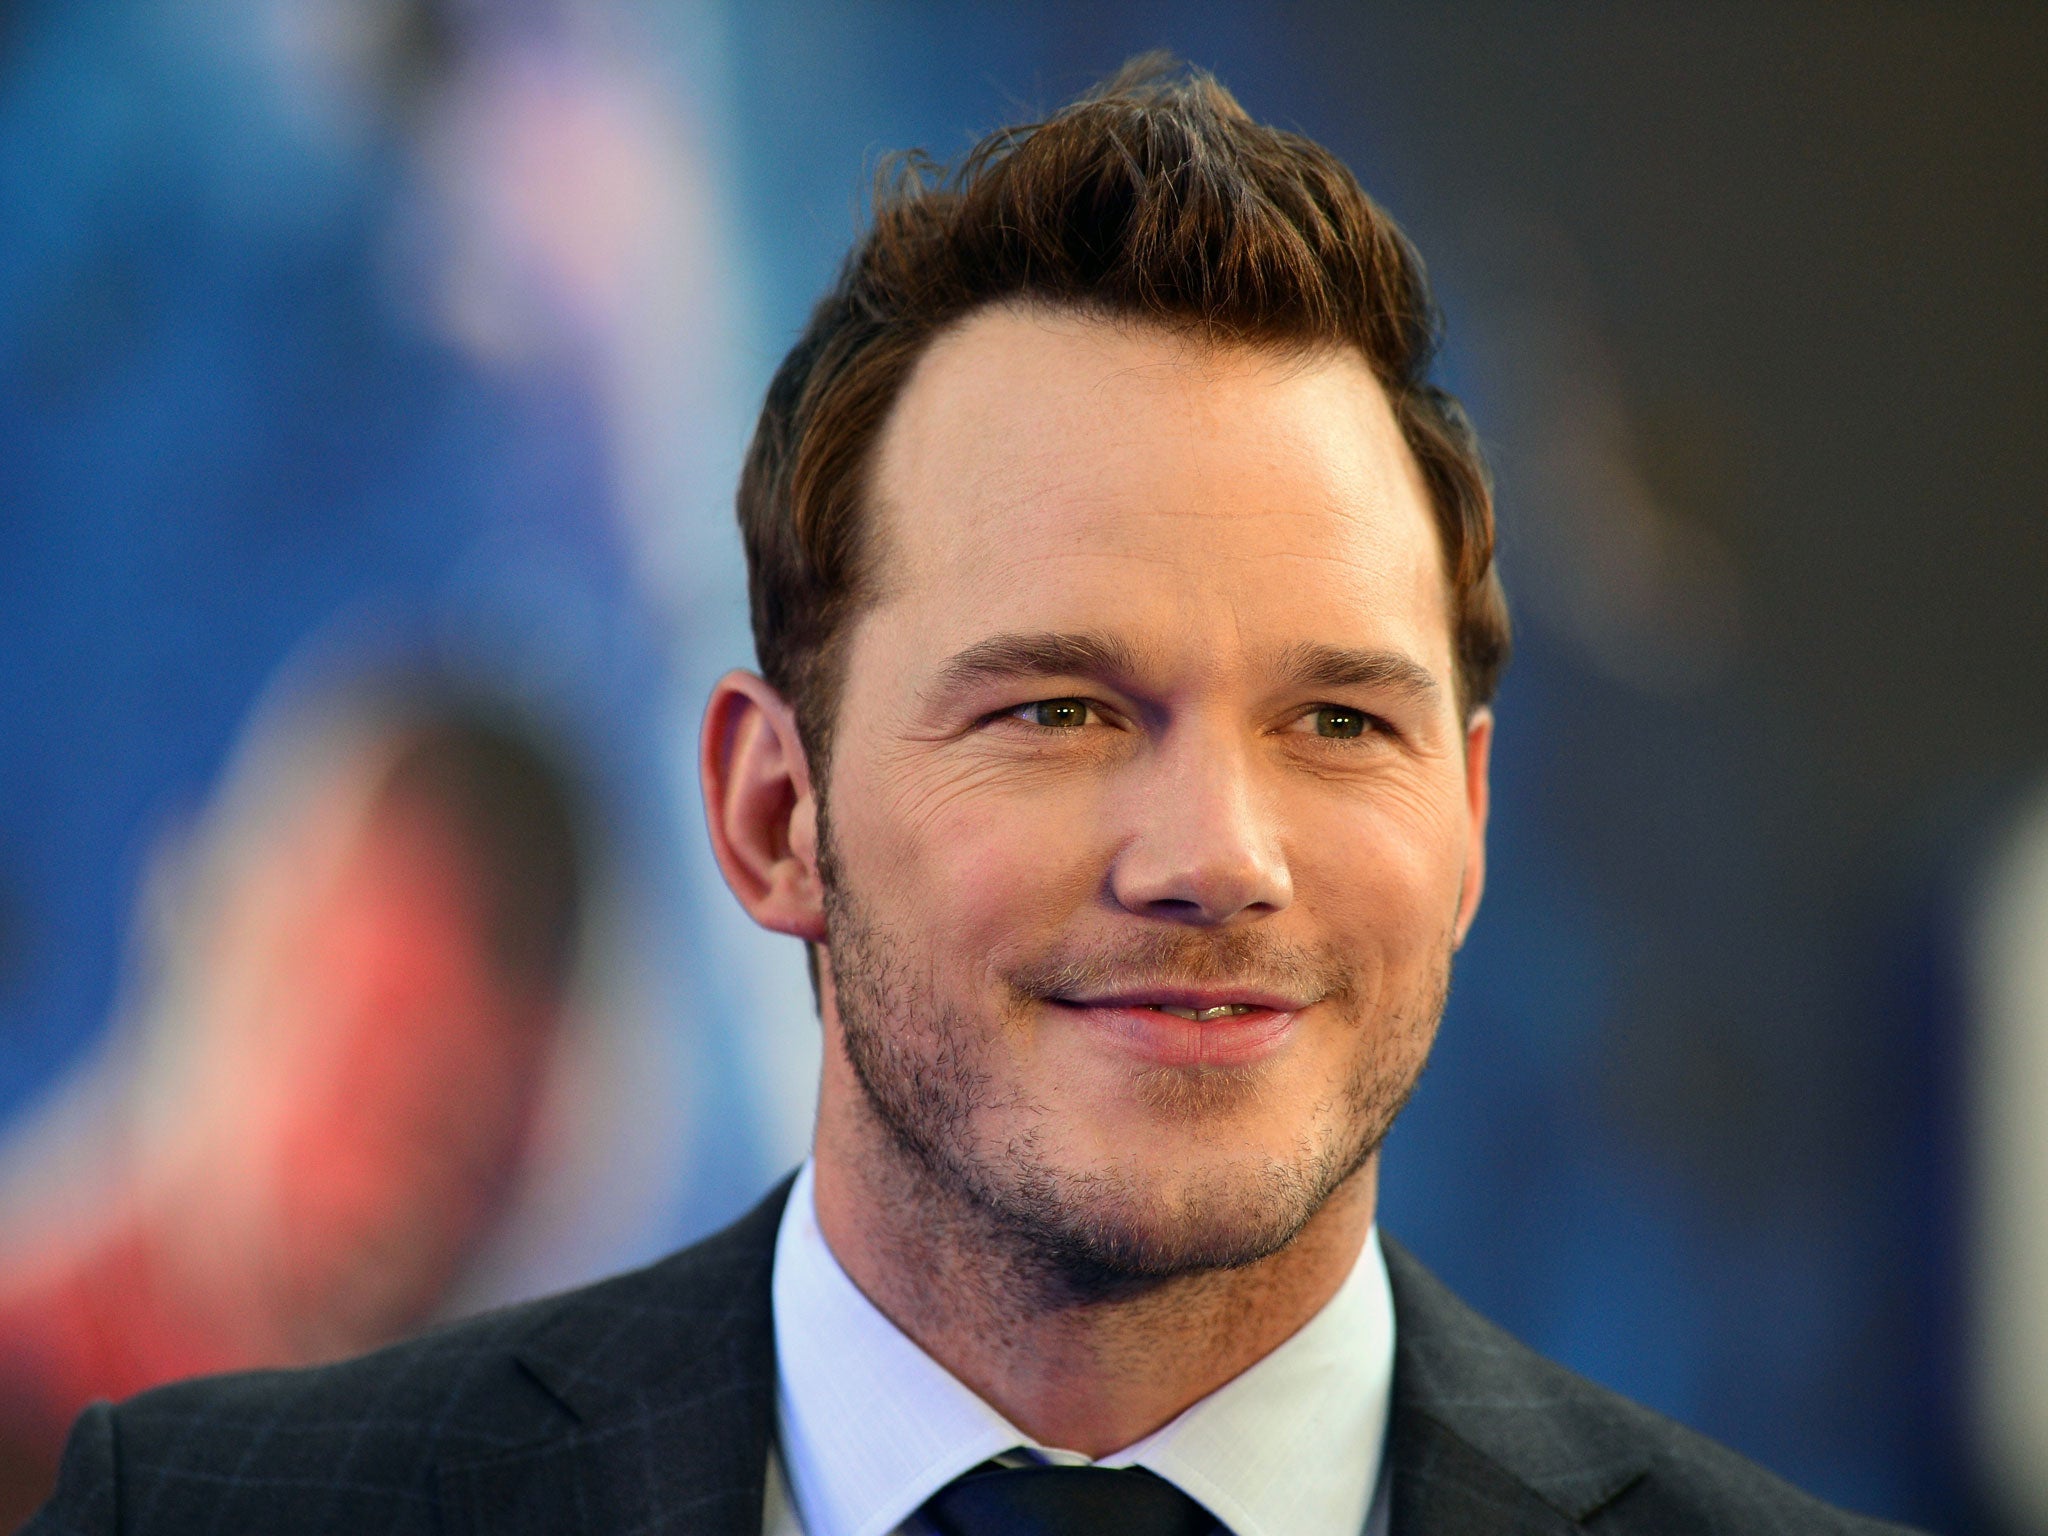 Chris Pratt has admitted he did not know what impotent meant